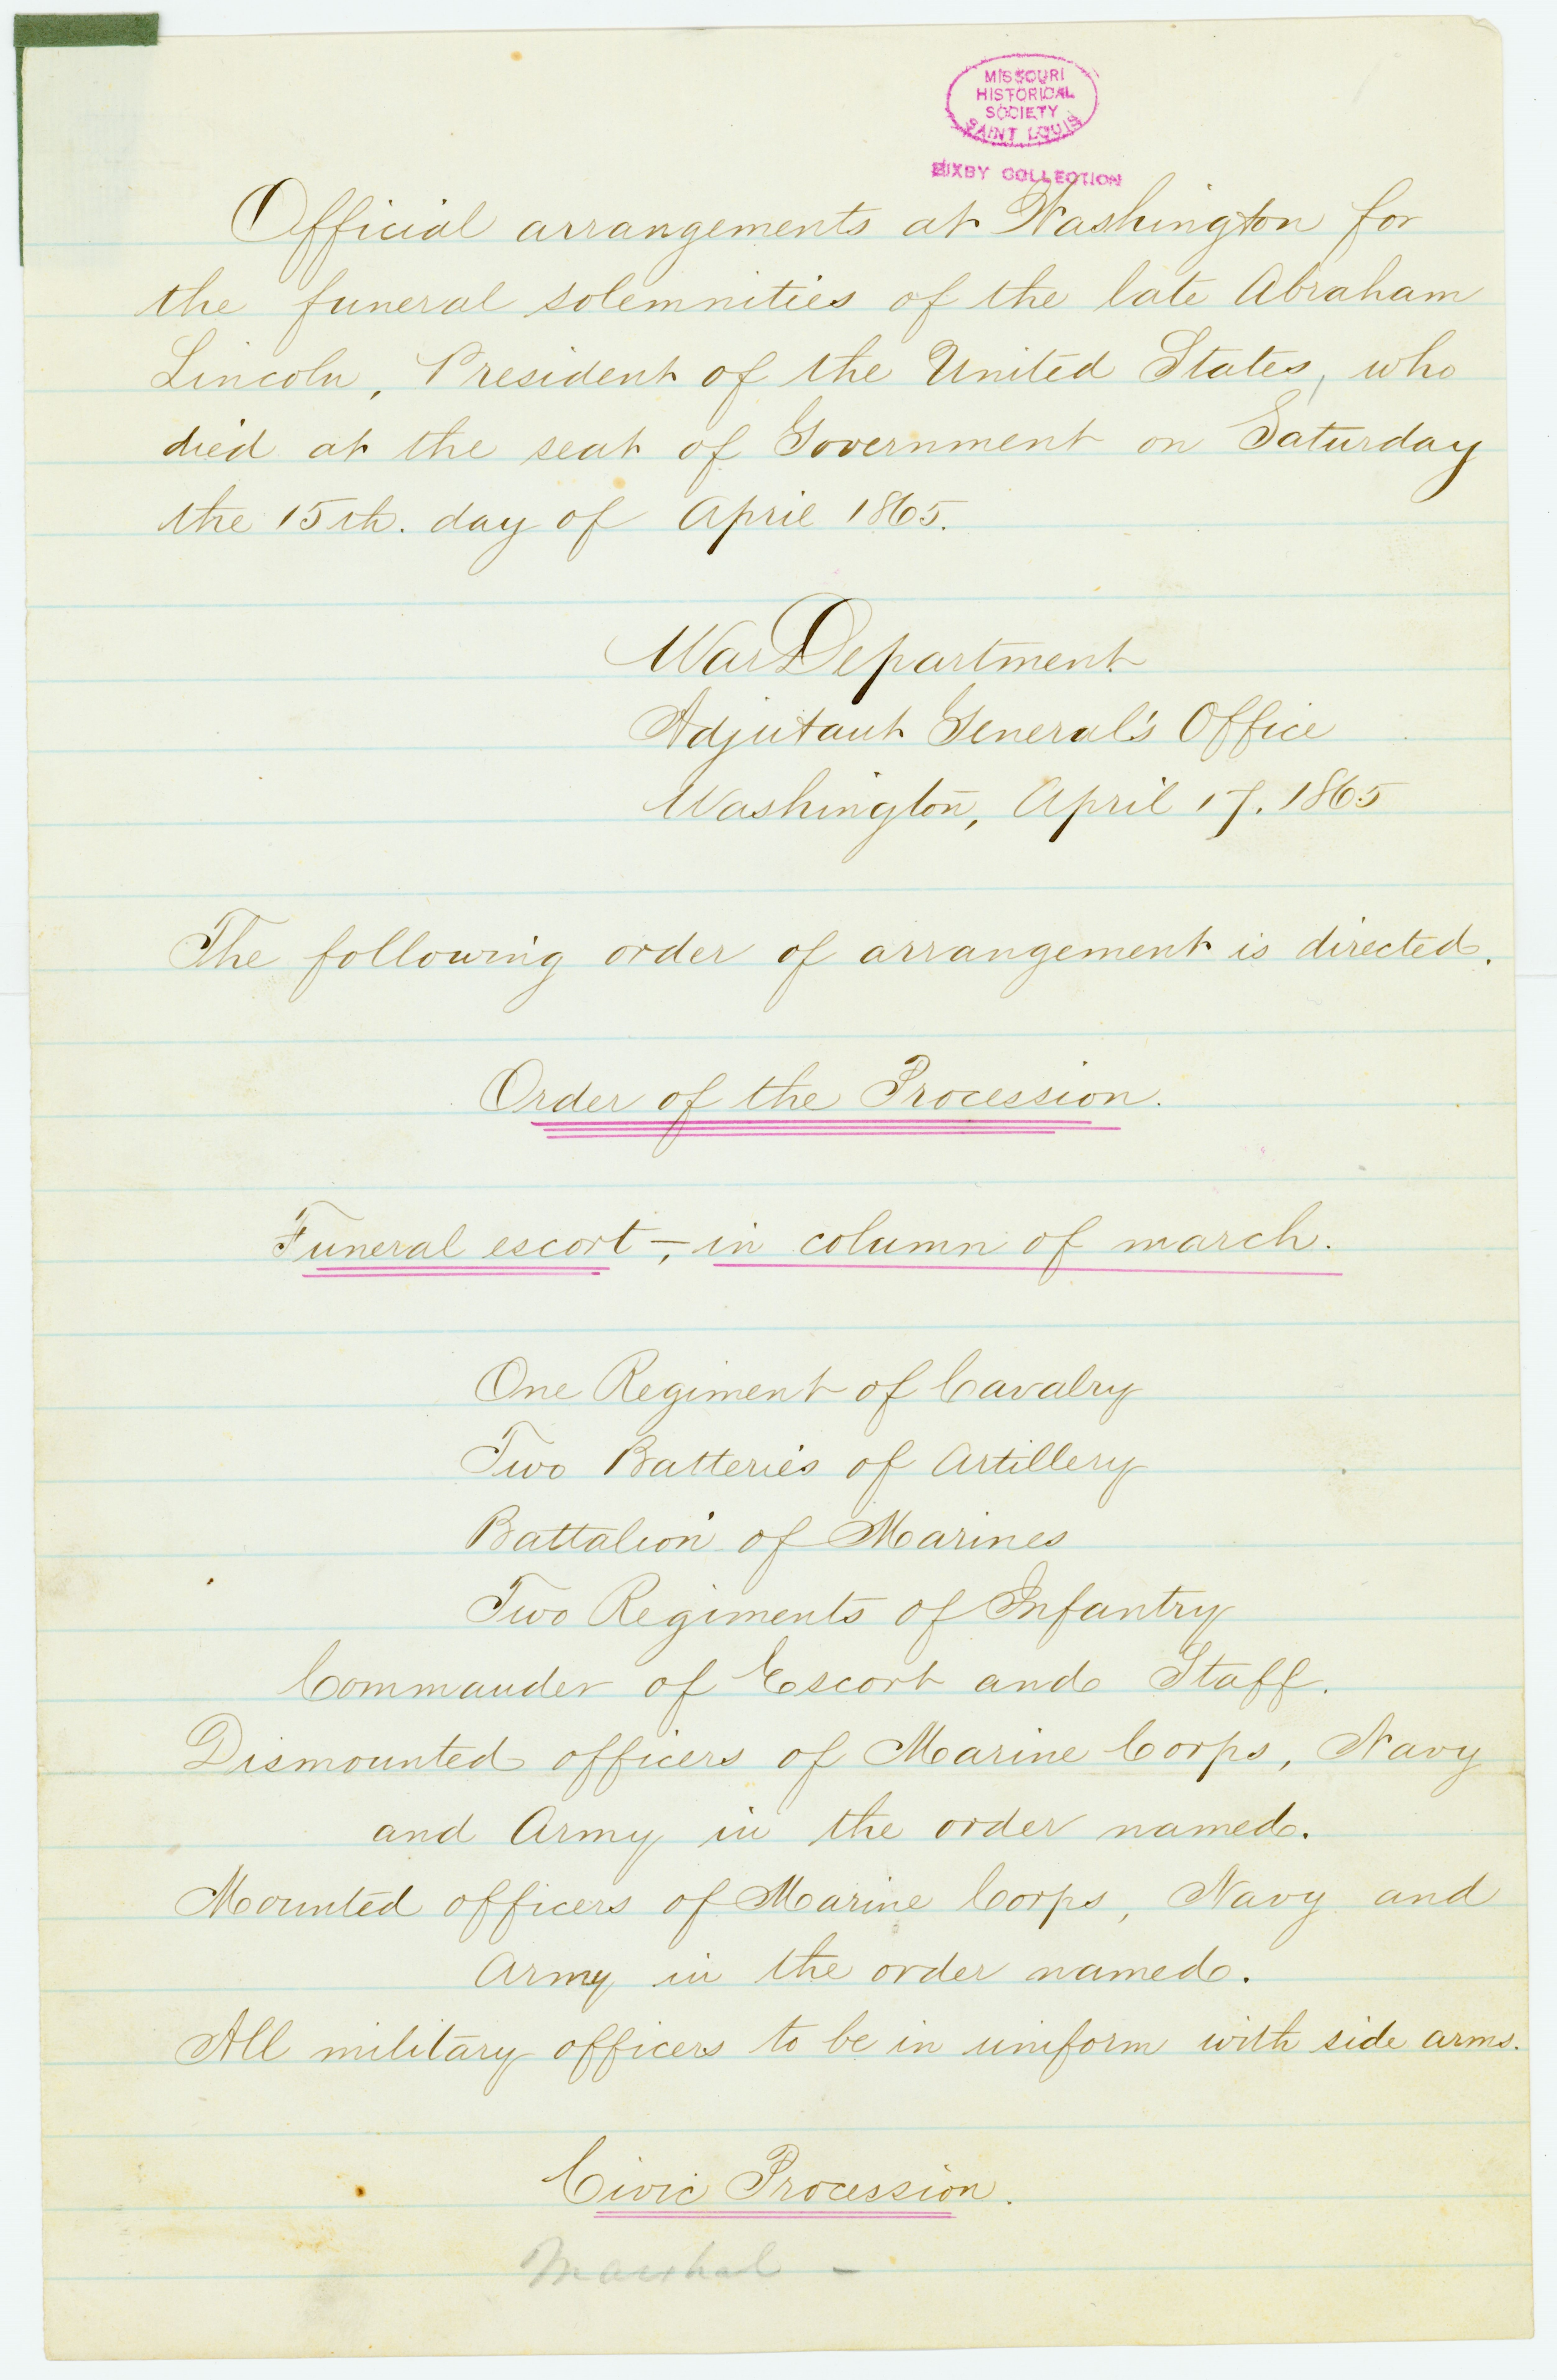 Order of procession of the funeral of the late President [Abraham Lincoln], as directed by order of the Secretary of War, Washington, April 17, 1865